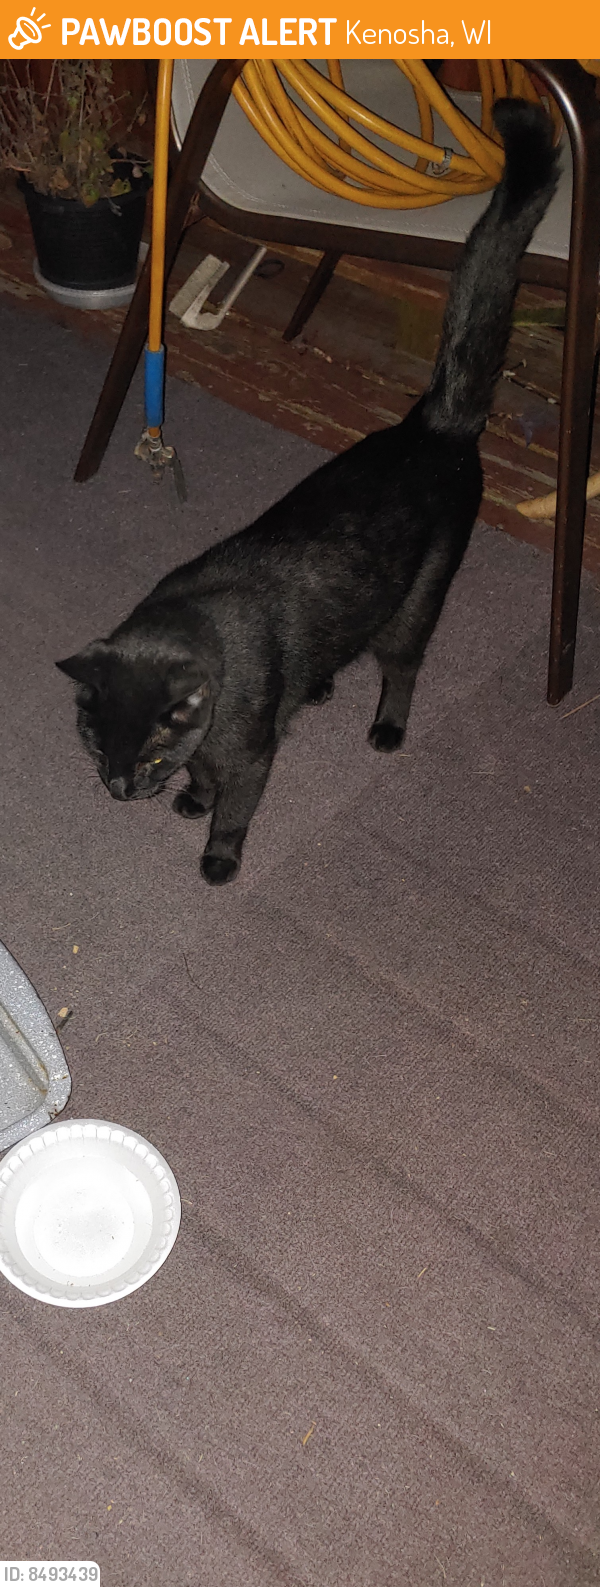 Found/Stray Unknown Cat last seen Across from Lincoln Park and 22nd Ave., Kenosha, WI 53143